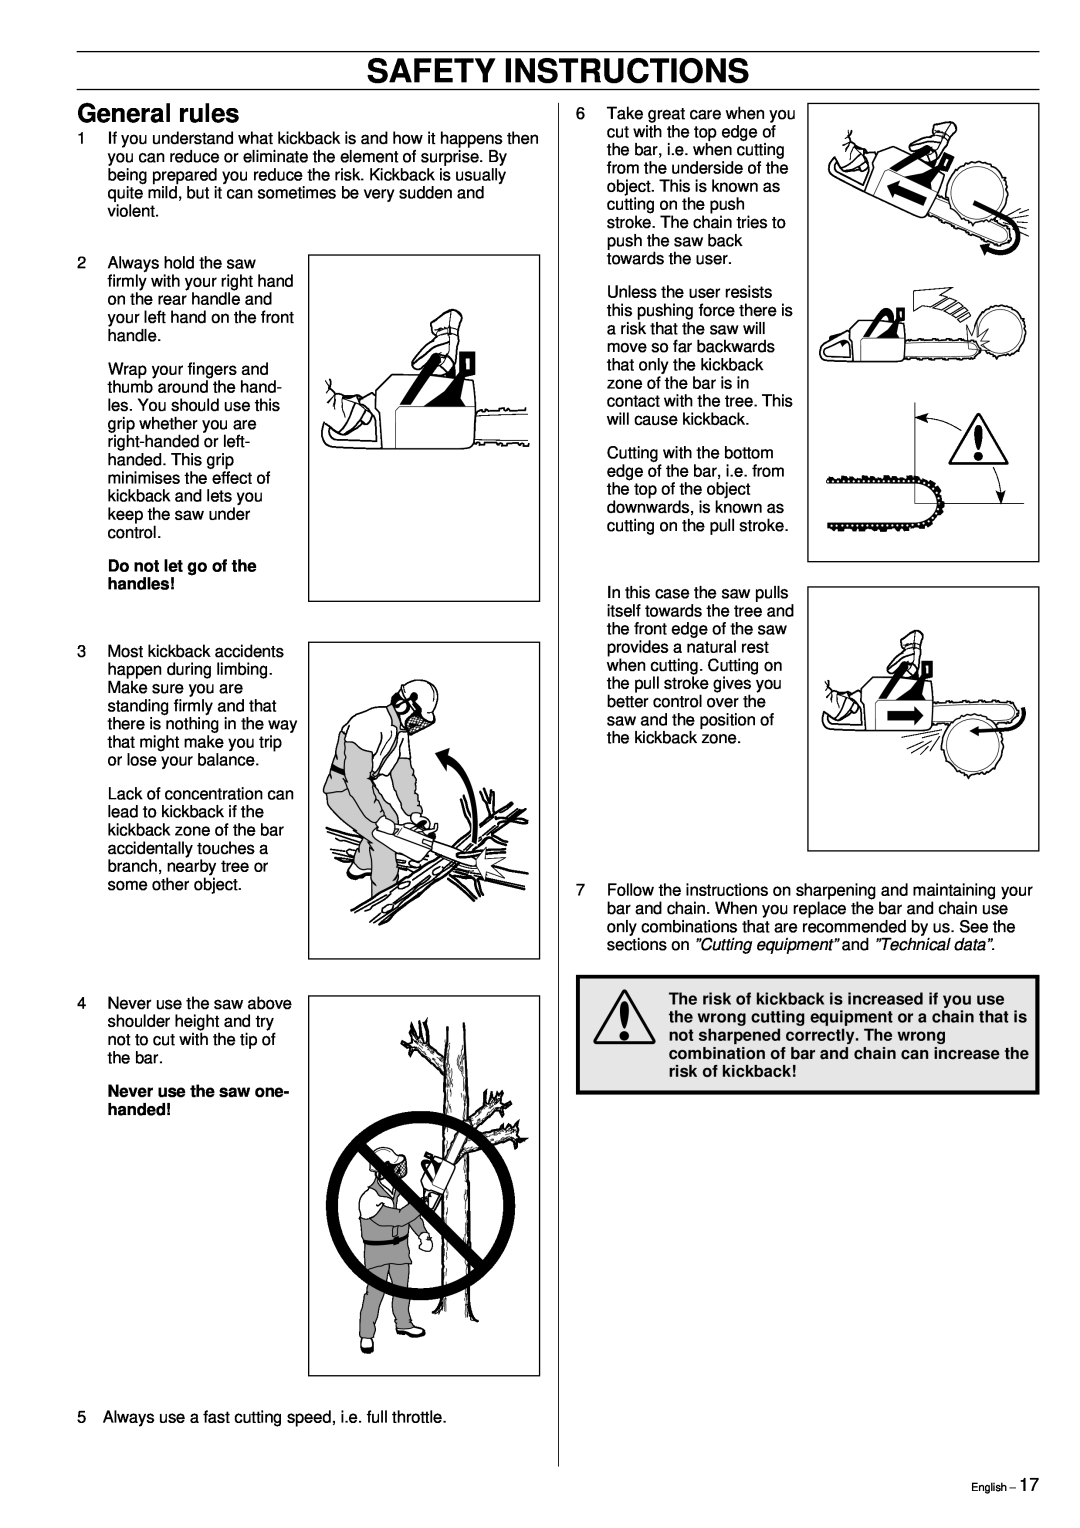 Husqvarna 51 manual Safety Instructions, General rules, Do not let go of the handles, Never use the saw one- handed 